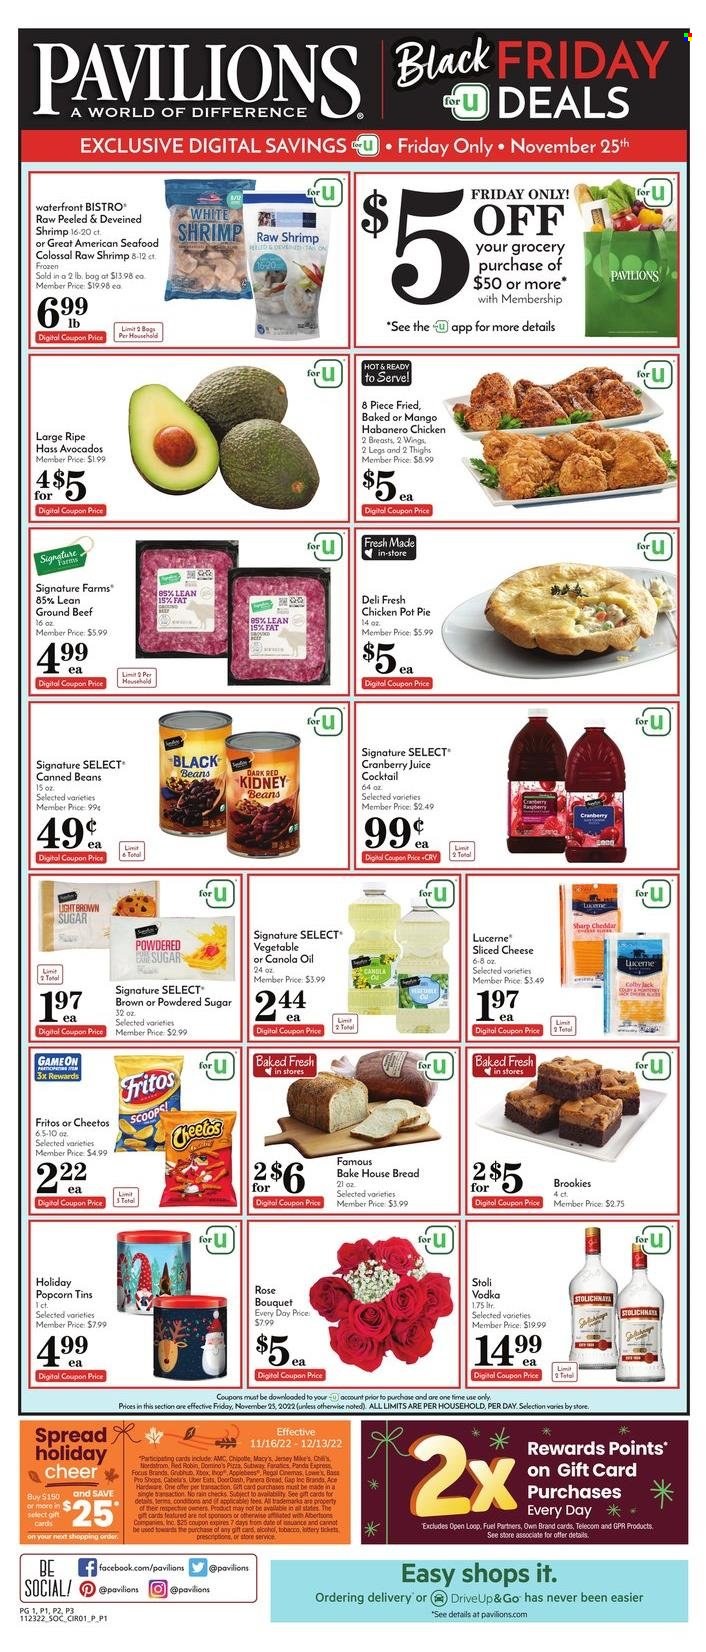 thumbnail - Pavilions Flyer - 11/25/2022 - 11/29/2022 - Sales products - pie, Ace, pot pie, beans, avocado, seafood, shrimps, pizza, habanero chicken, sliced cheese, cheddar, 7 Days, Fritos, Cheetos, popcorn, cane sugar, icing sugar, black beans, kidney beans, canola oil, oil, cranberry juice, juice, wine, rosé wine, vodka, beef meat, ground beef, panda, pot, bouquet, rose. Page 1.